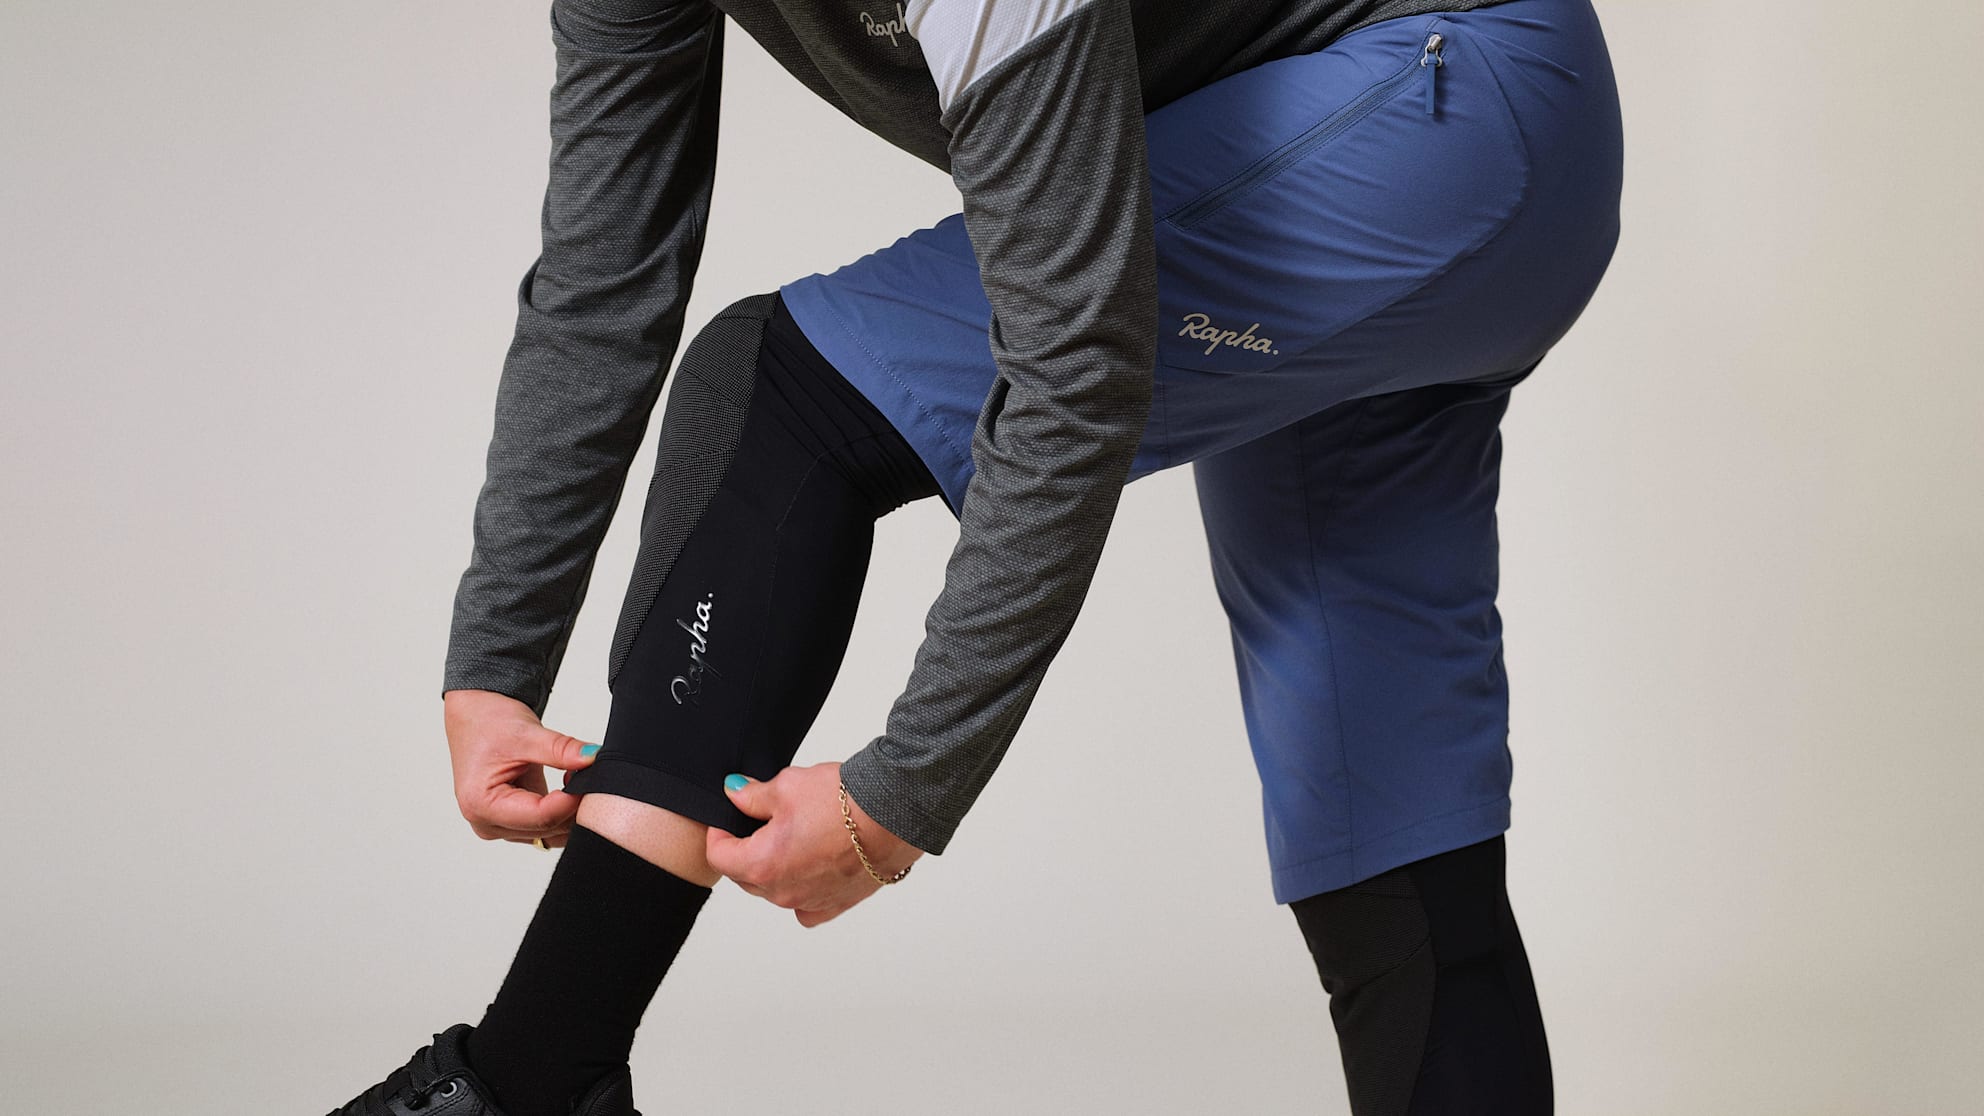 Review: Are Rapha Knee Pads comfortable, breathable and protective